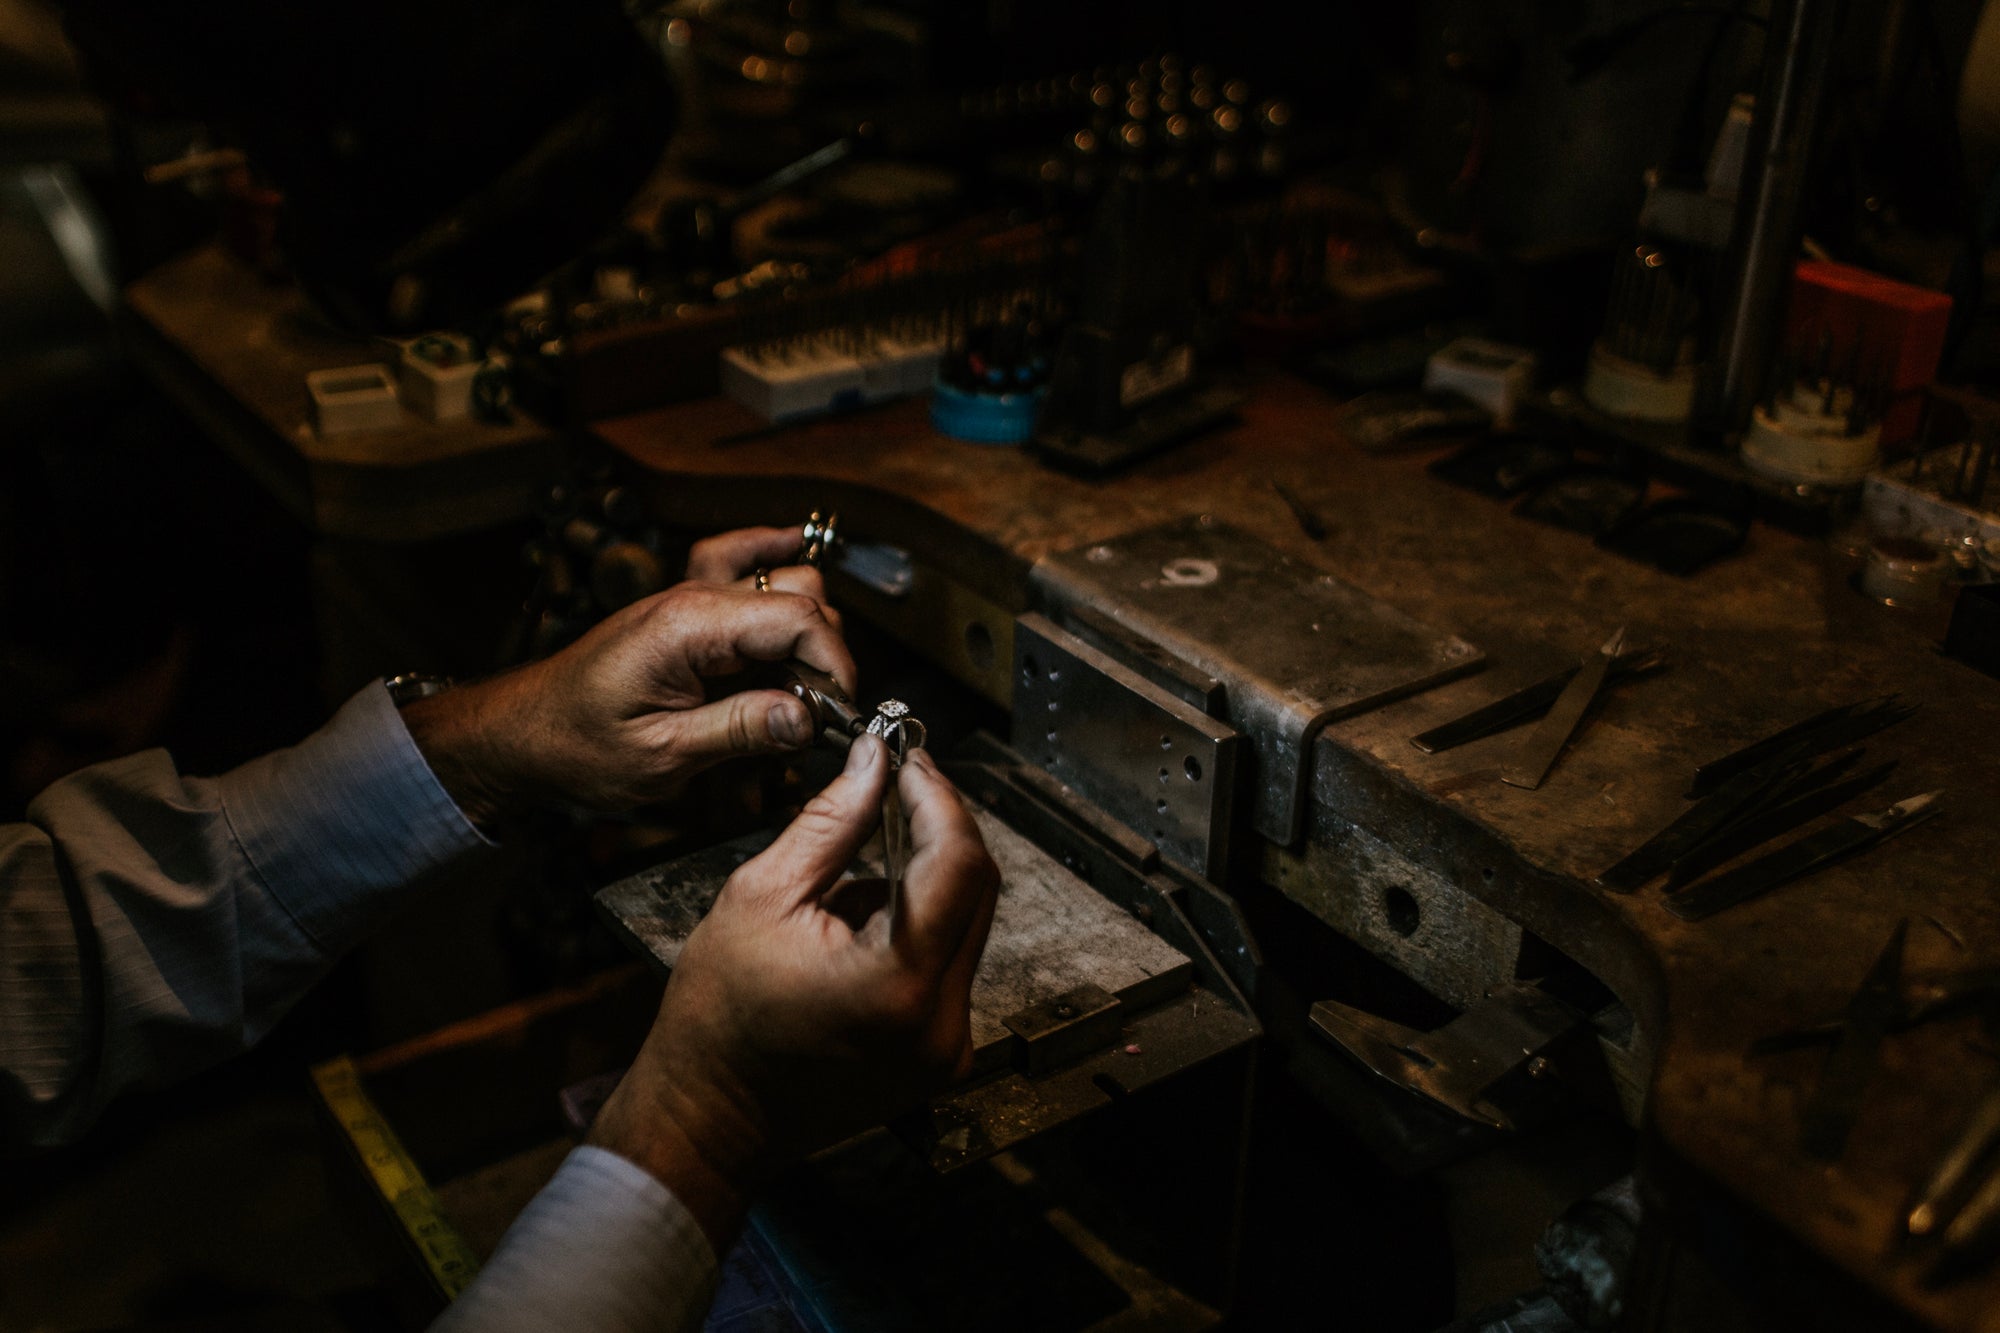 Goldsmiths soldering a ring at their Jewelers bench in Windsor, California